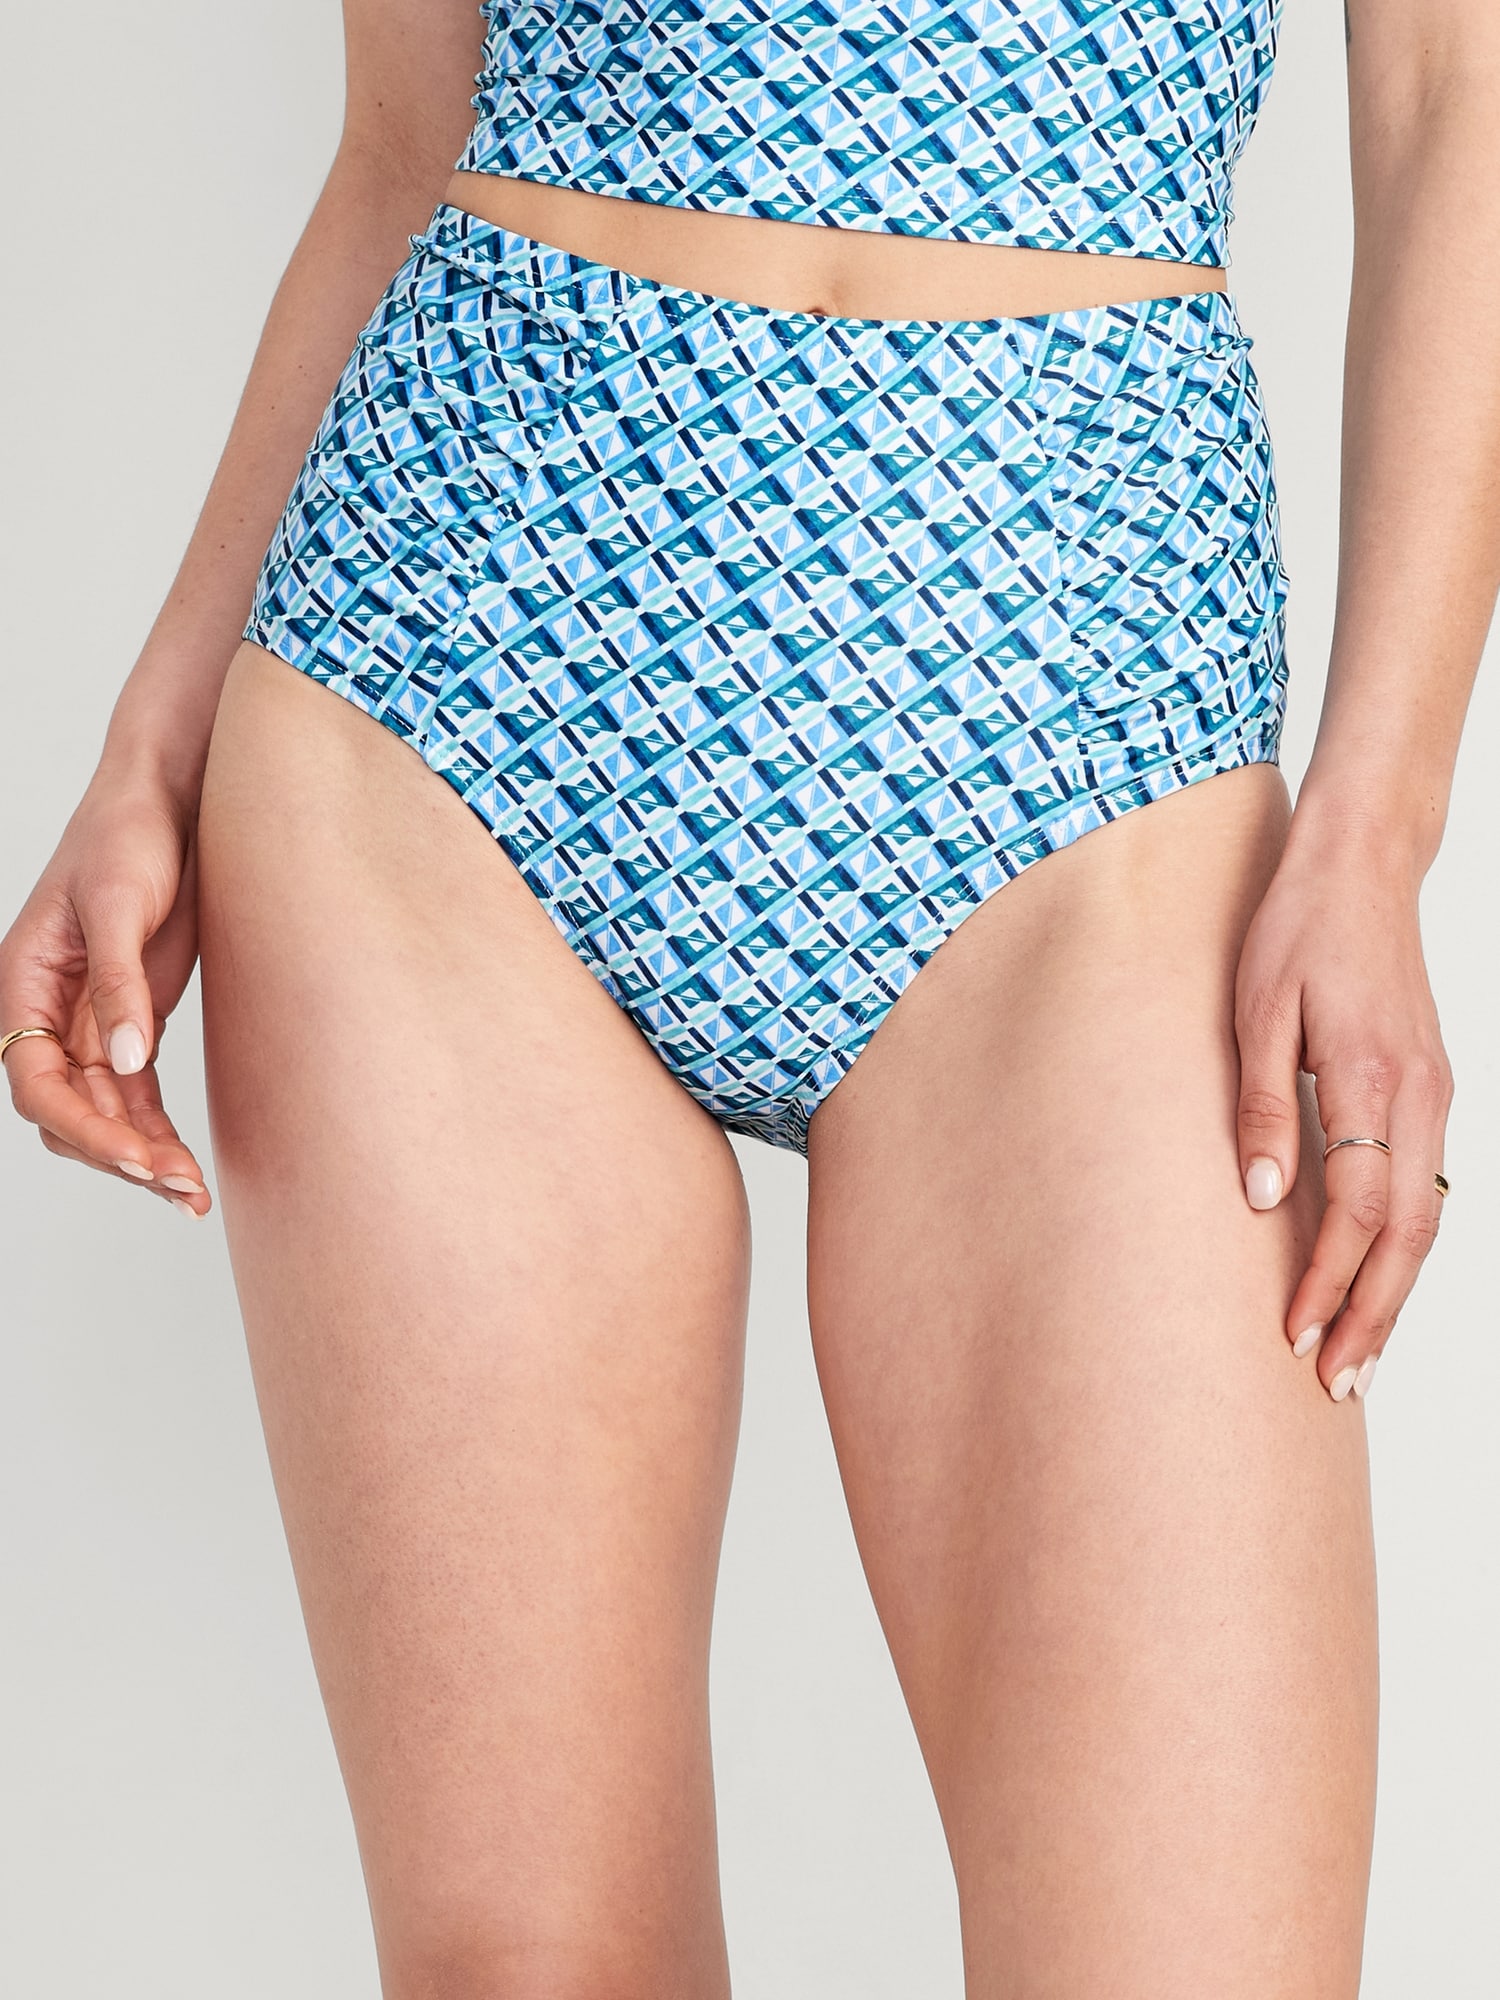 Old Navy High-Waisted Printed Ruched Bikini Swim Bottoms for Women blue. 1